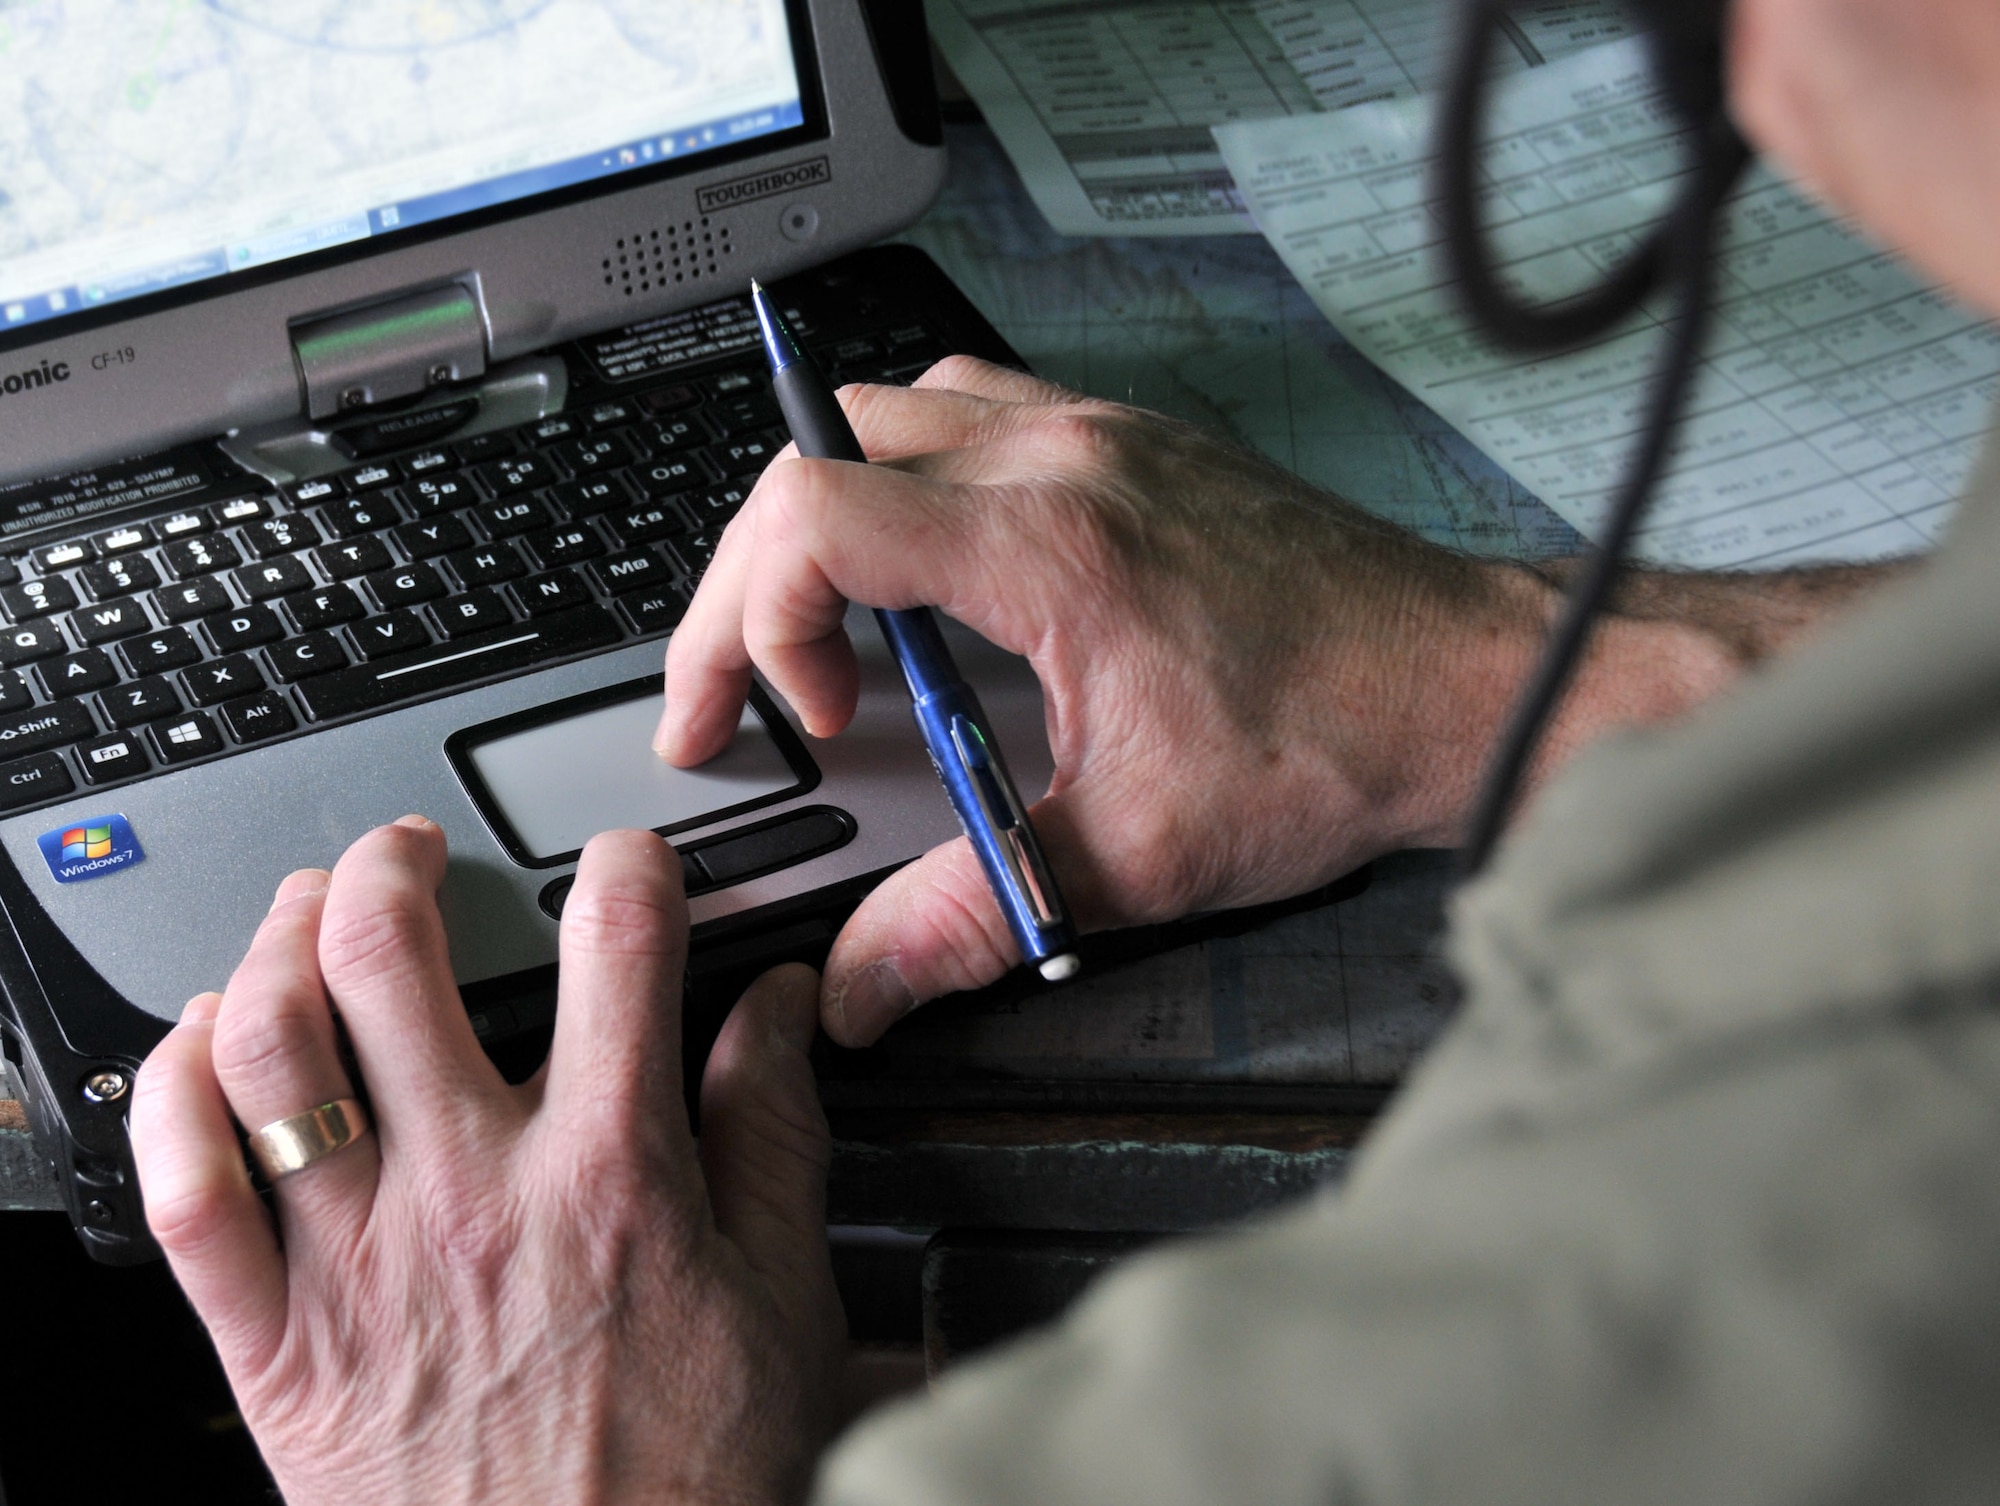 Lt. Col. Aldo Filoni, primary evaluator navigator with the 911th Operations Group, works with the navigation computer to plot course information into the main aviation computer of a C-130 Hercules prior to takeoff here, March 7, 2015. The navigator’s job is to plot the course into the main computer and communicate with the pilots to keep the plane on track. (U.S. Air Force photo by Senior Airman Marjorie A. Bowlden)